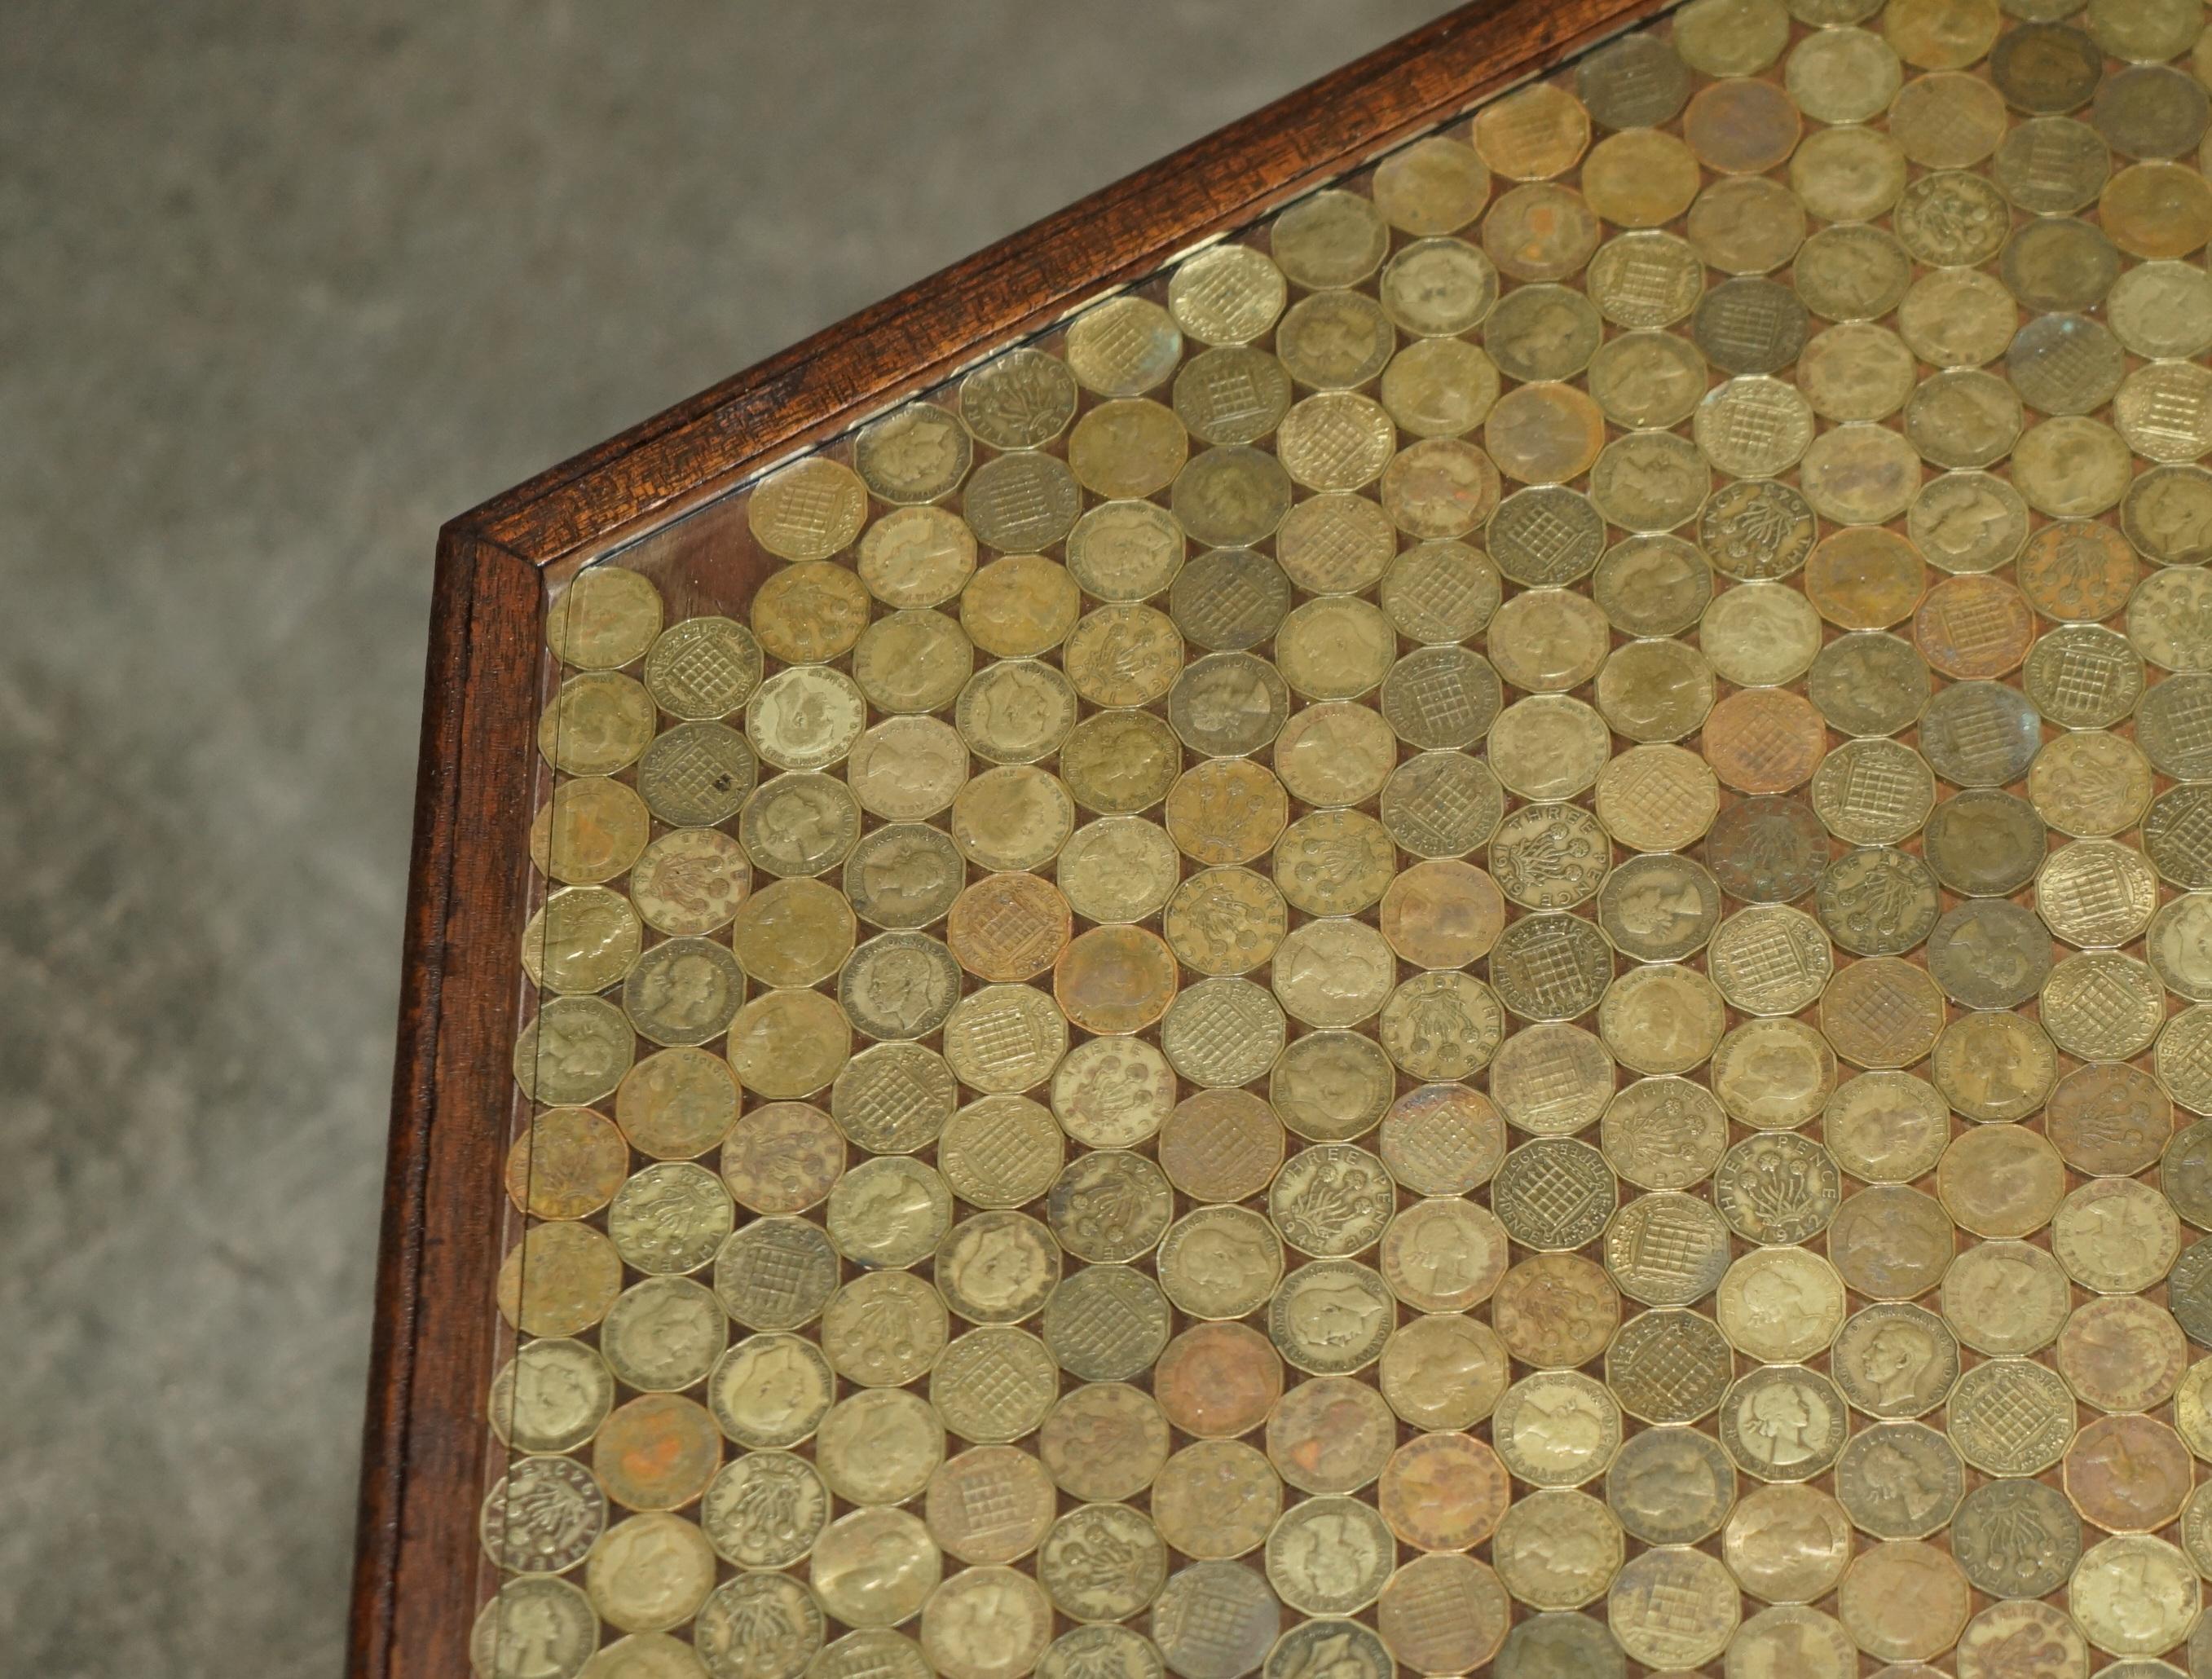 ANTIQUE CIRCA 1920 COFFEE TABLE COVERS IN ENGLISH THREE PENCE COINS FROM 1940er Jahre (Handgefertigt) im Angebot